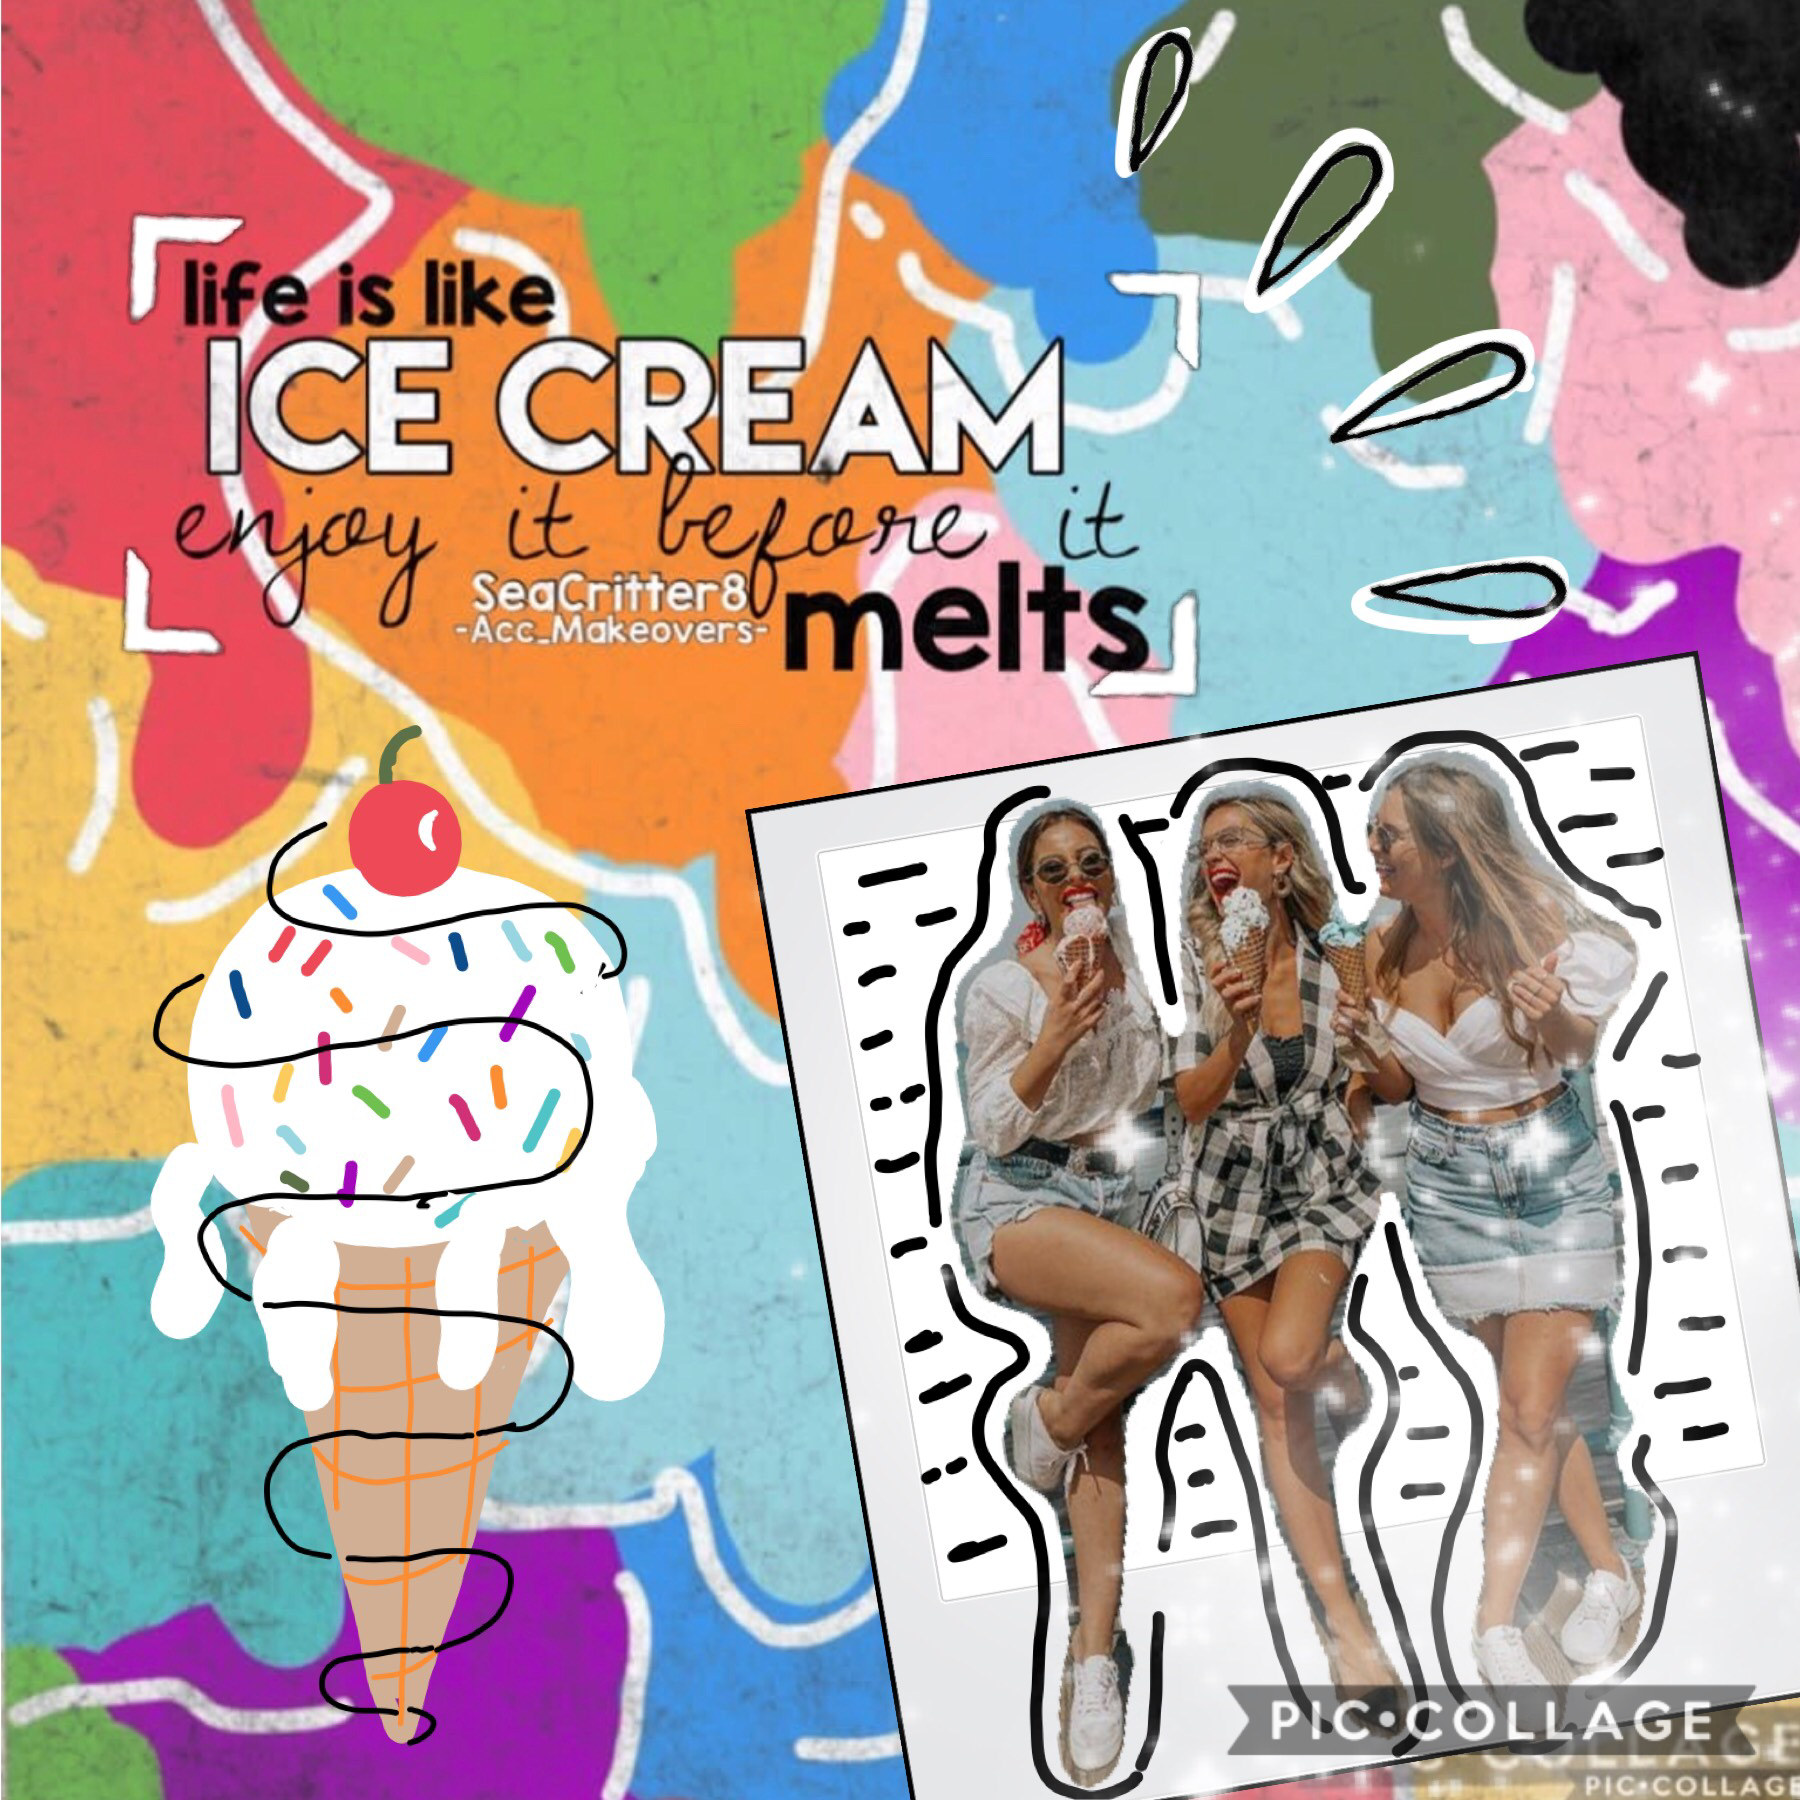 Collab with the amazing -acc_makeovers-, she did the text,💕this was my first drawing collage what do you guys think of the bg and ice cream? 💗